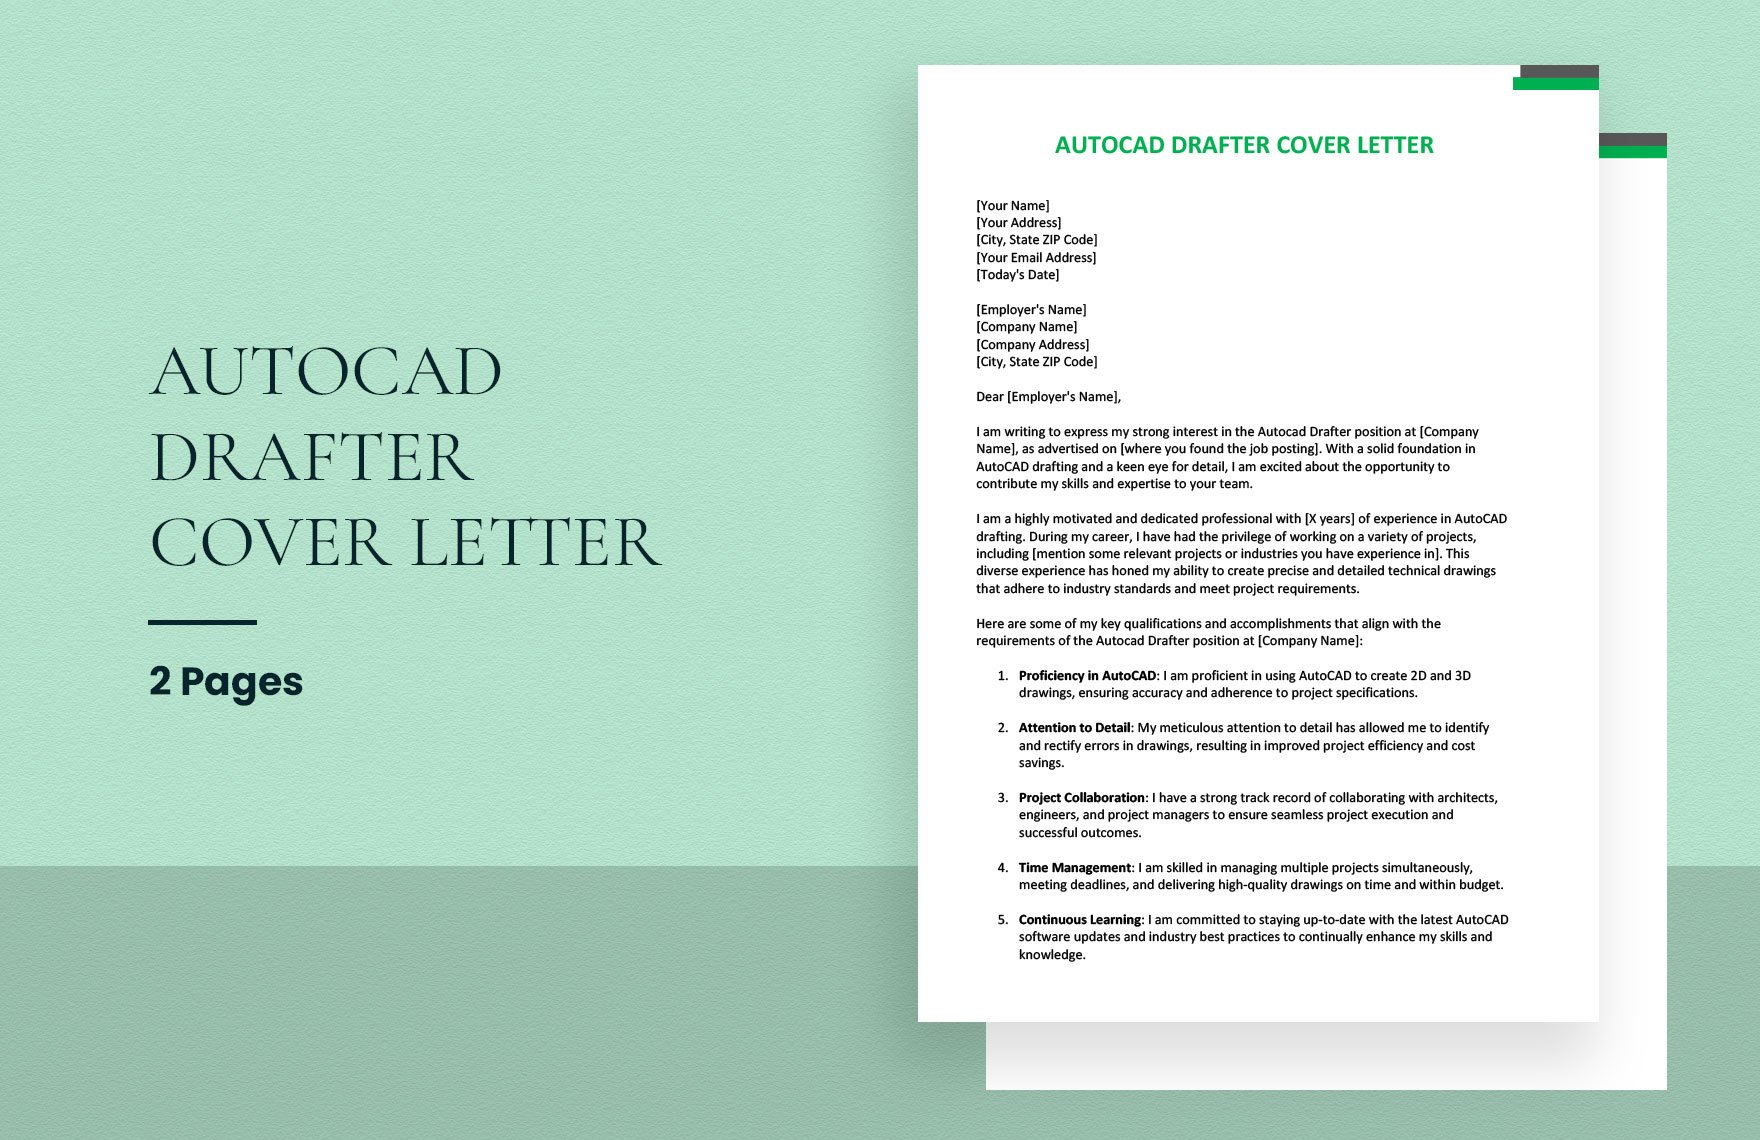 Autocad Drafter Cover Letter in Word, Google Docs